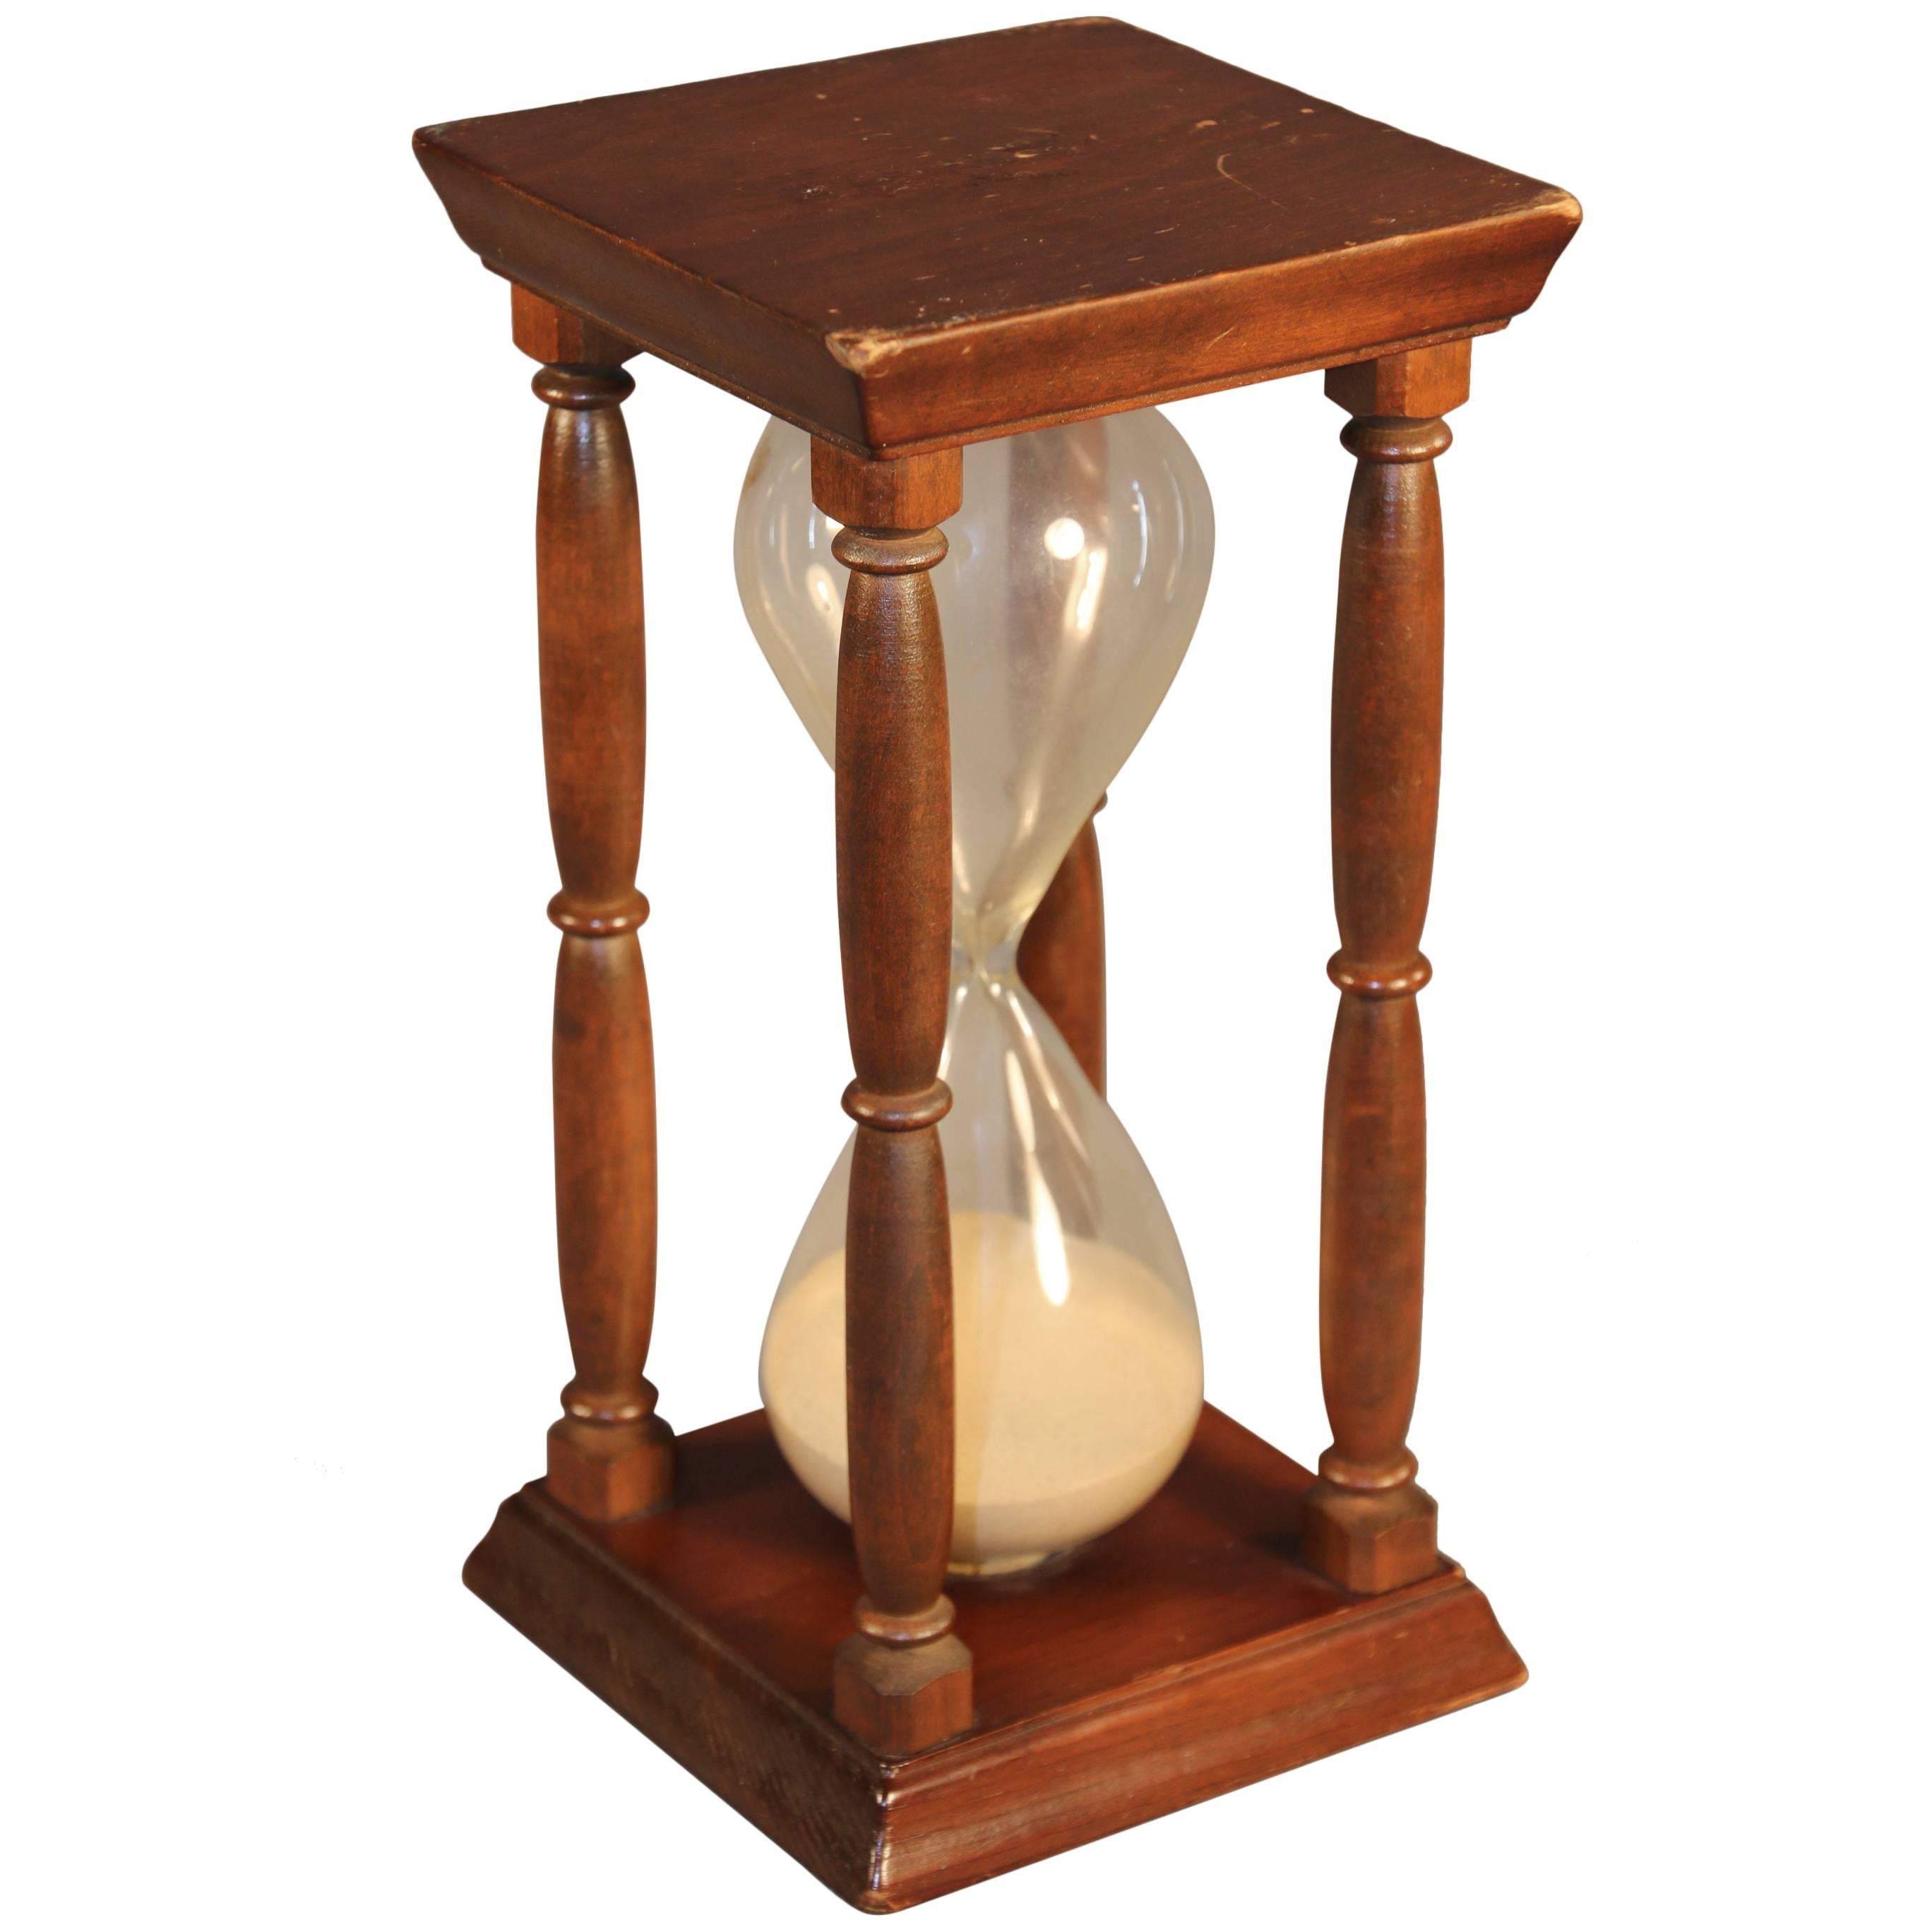 Late 19th Century Sand-Filled Hourglass For Sale